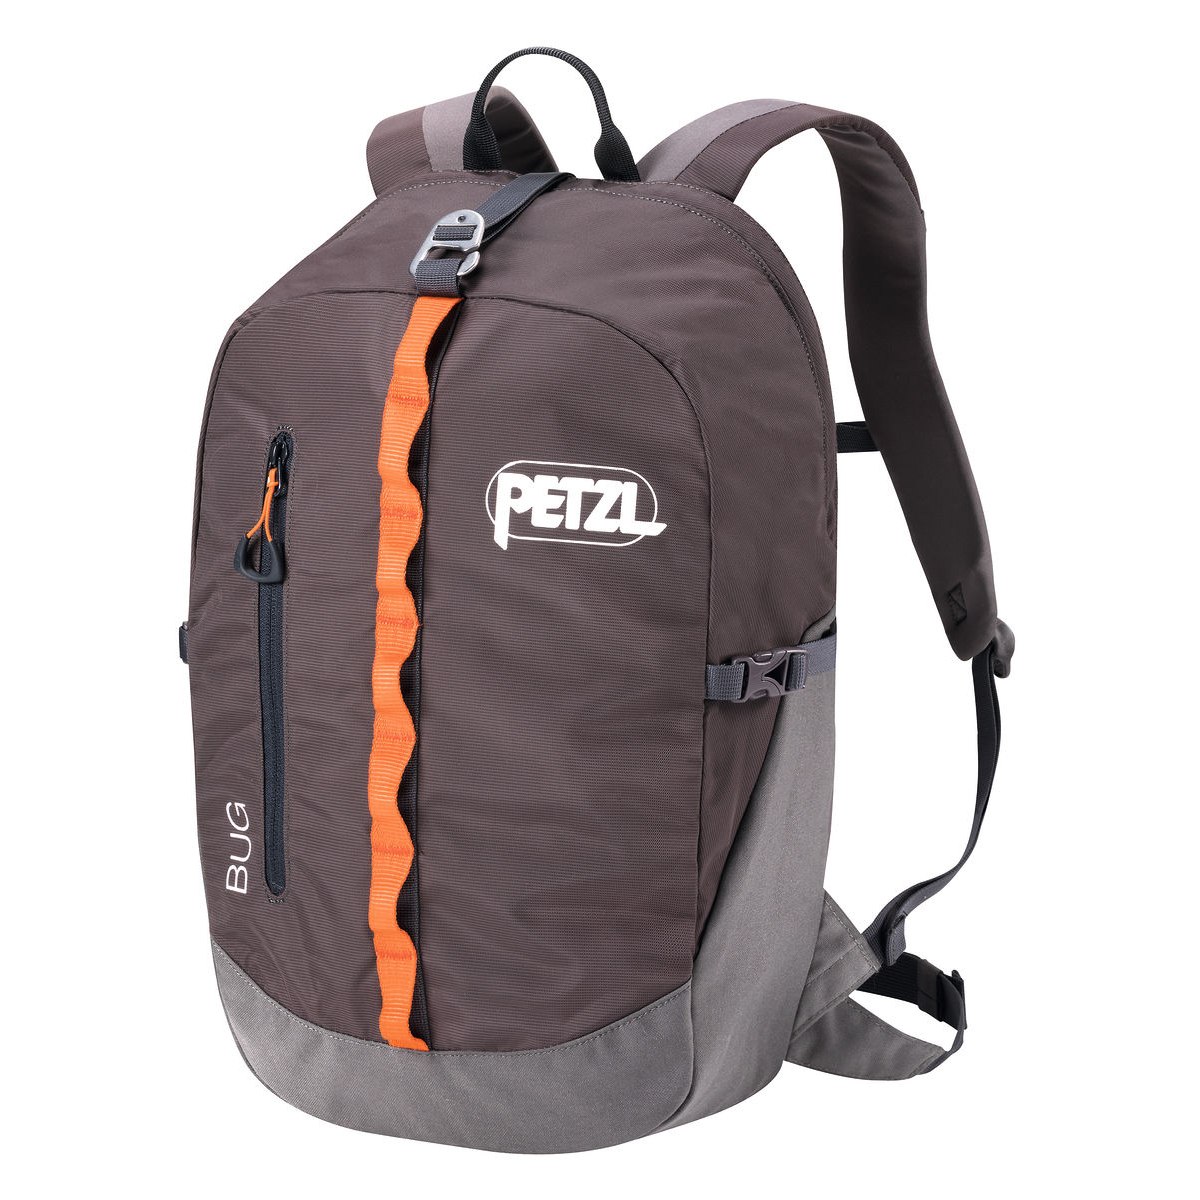 Picture of Petzl Bug Backpack - grey